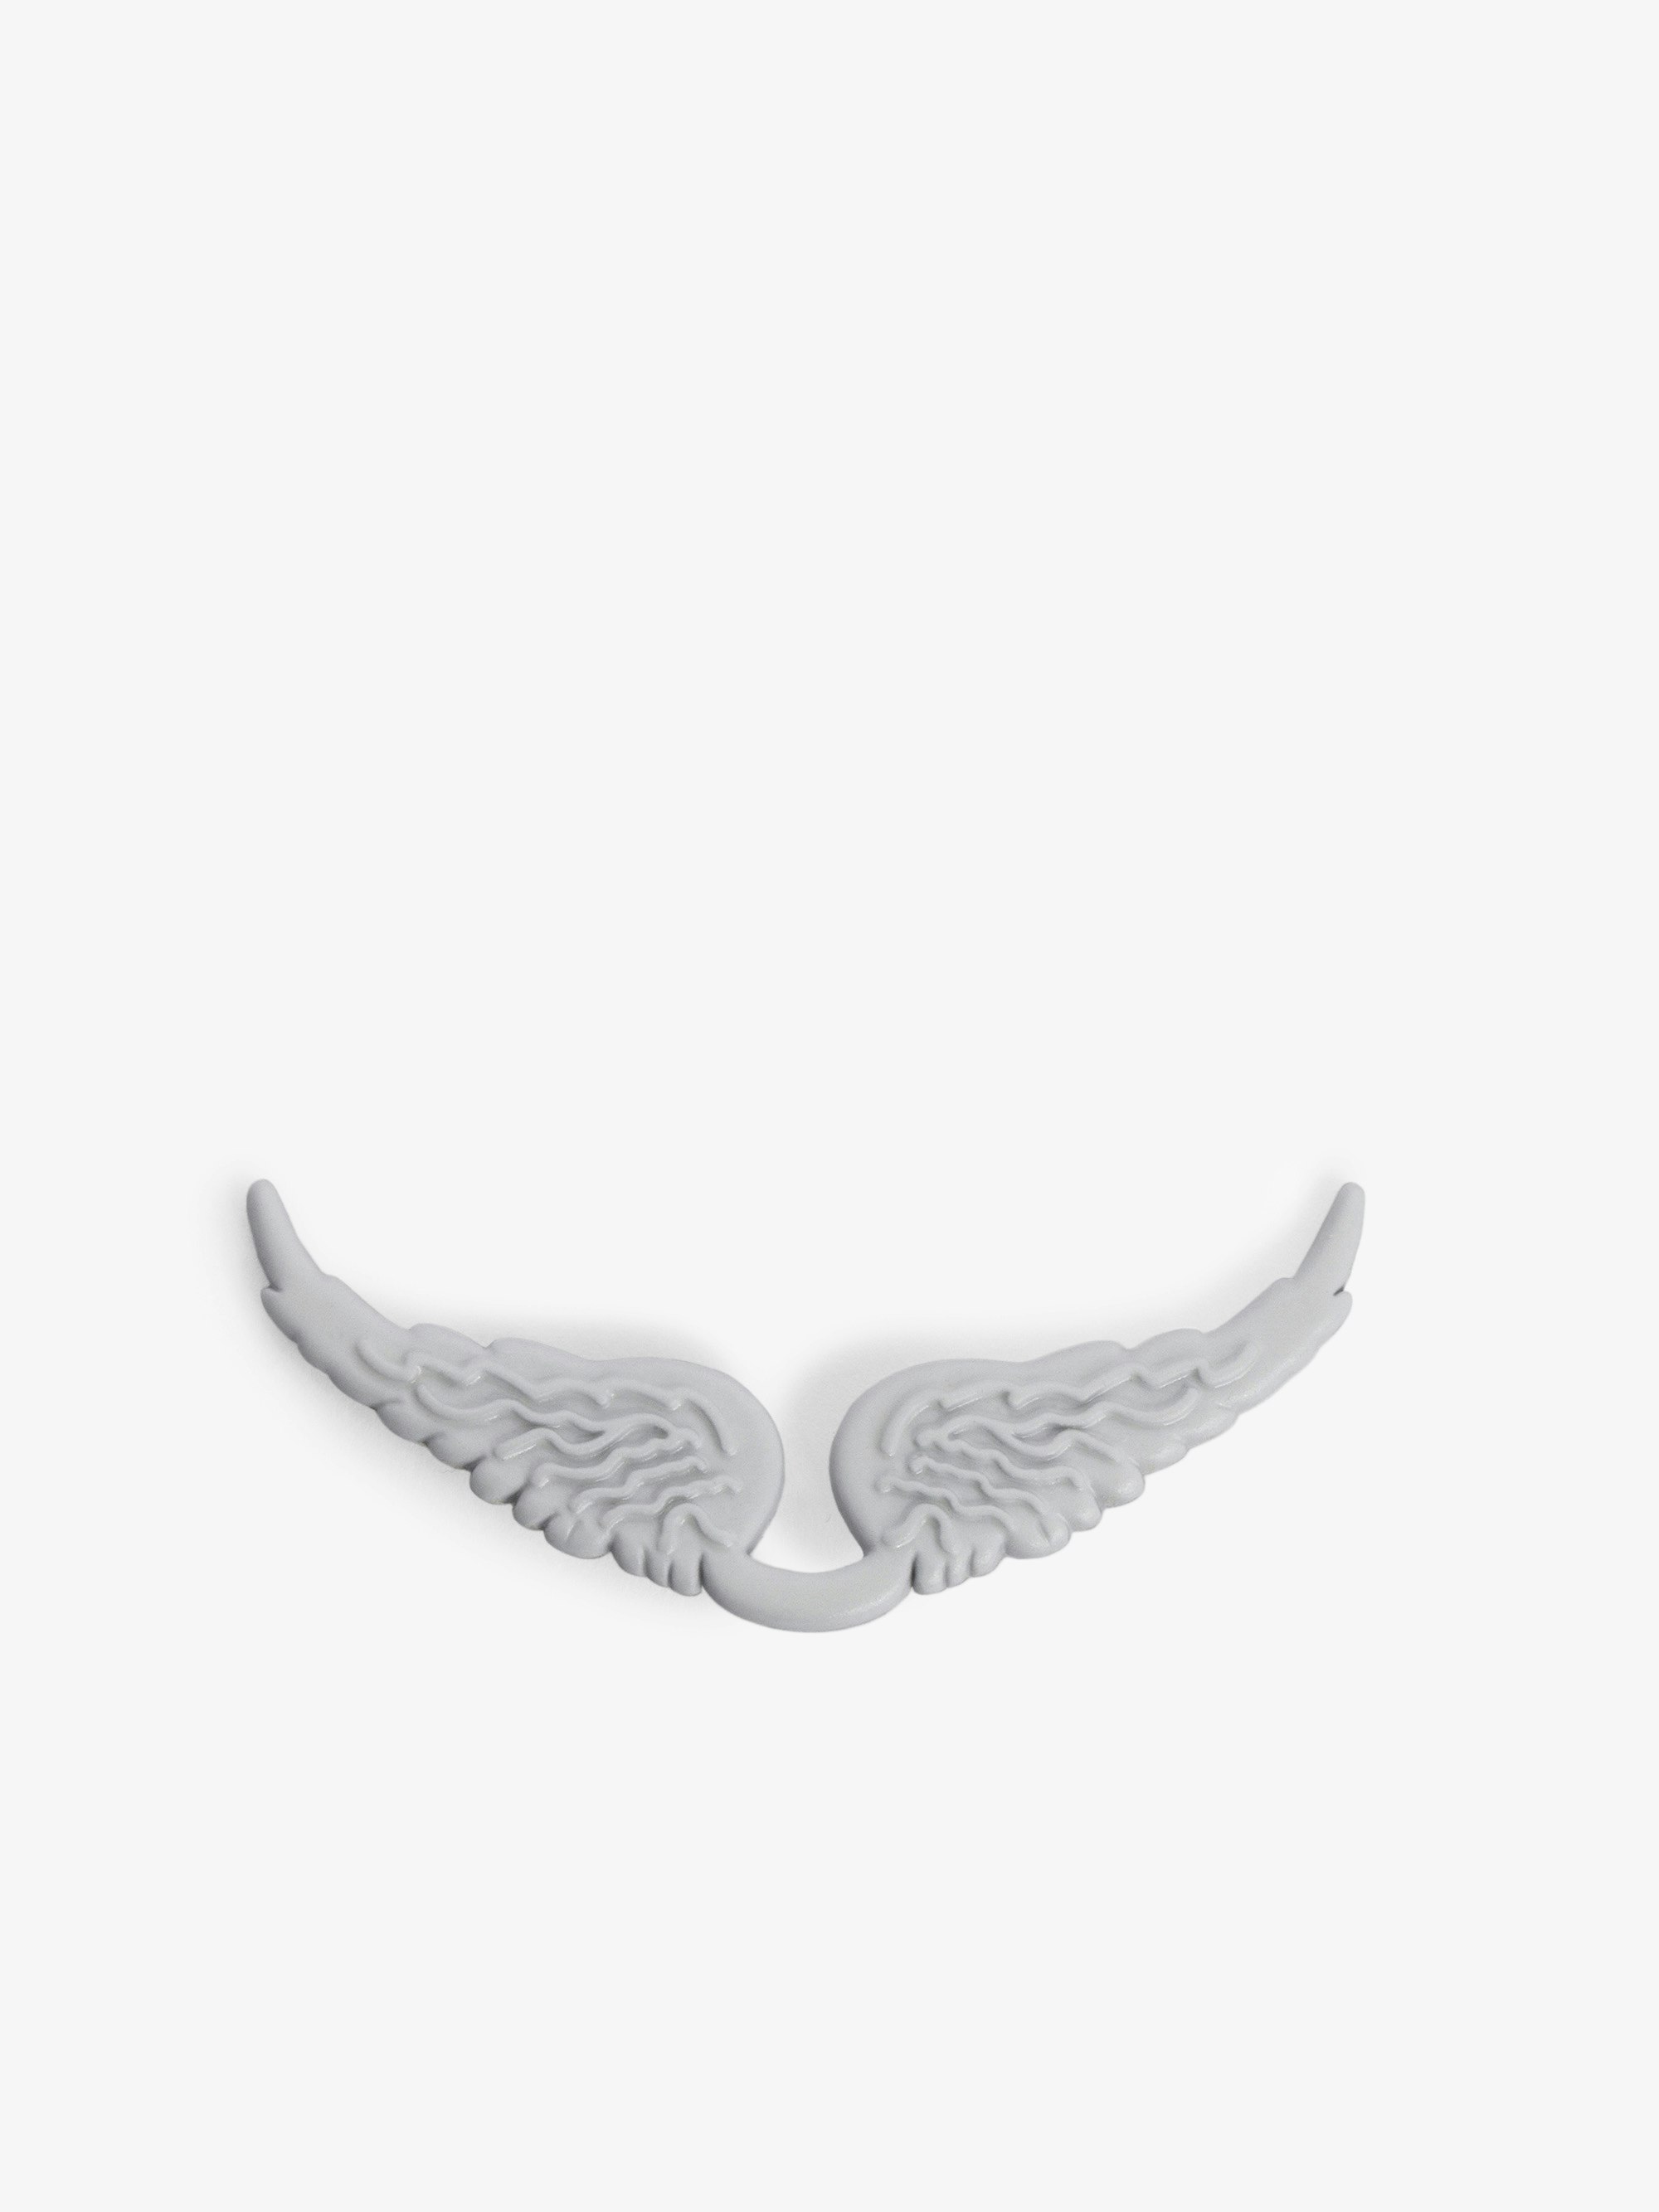 Phosphorescent Swing Your Wings Charm - Removable Swing Your Wings charm